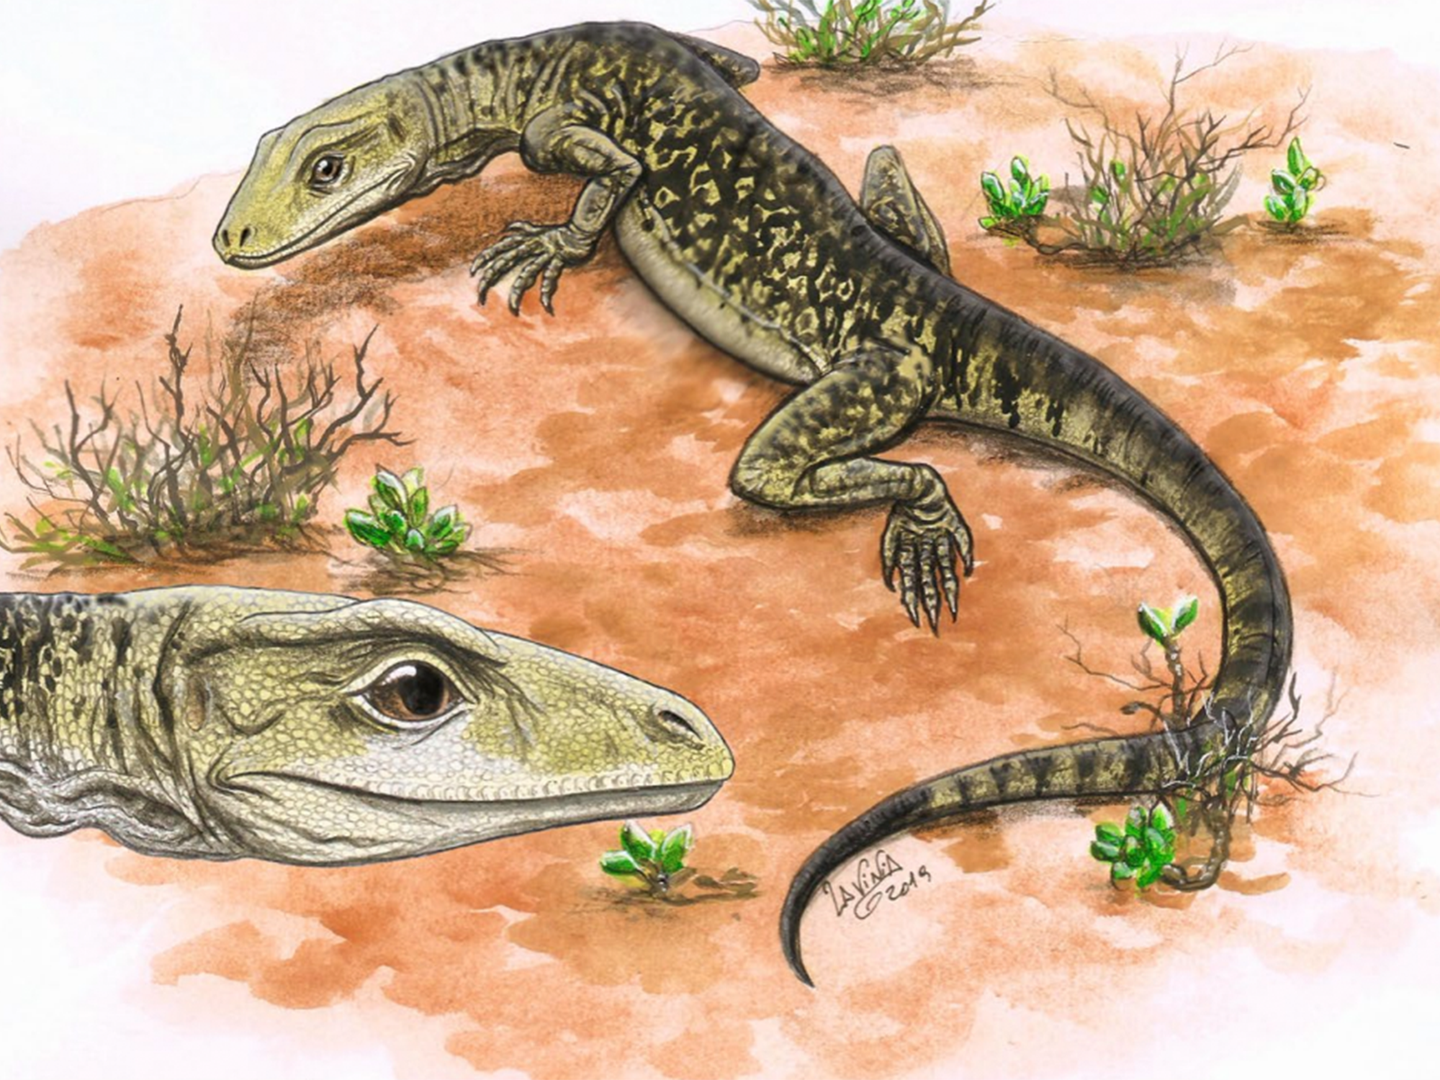 Artist’s impression of Cryptovaranoides when it was alive